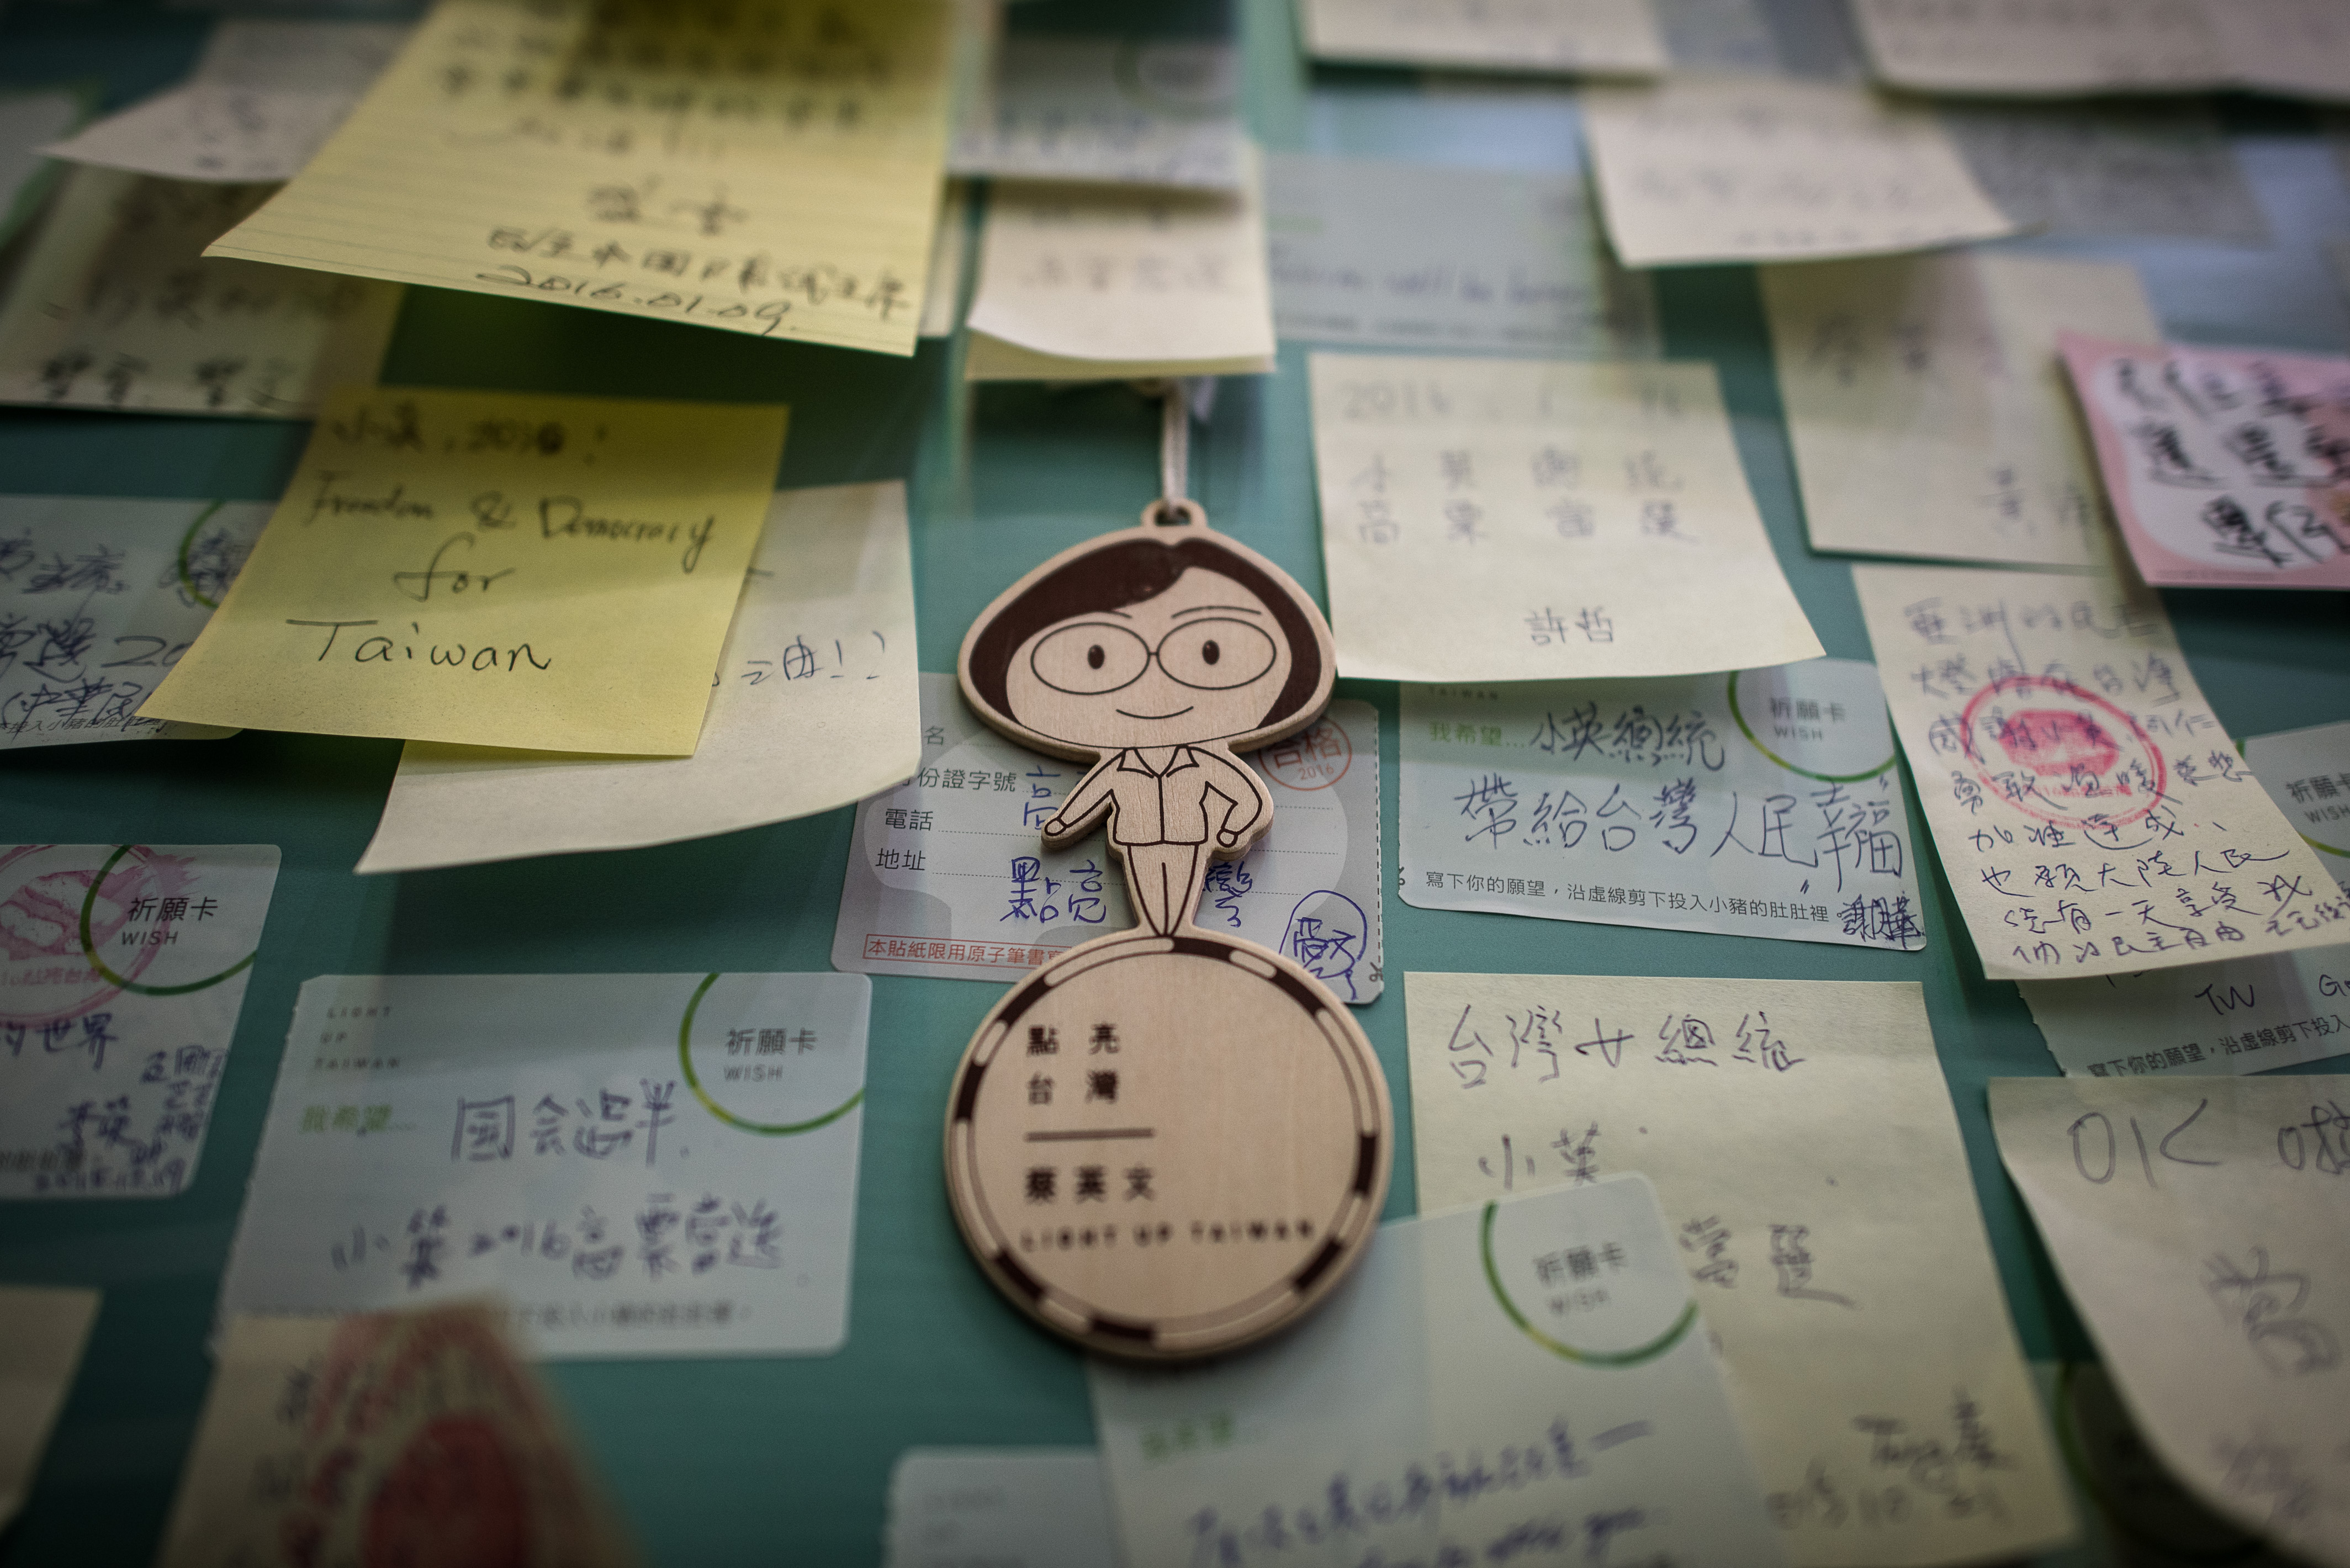 A figurine depicting Democratic Progressive Party presidential candidate Tsai Ing-wen hangs with messages of support in Taipei on Jan. 12, 2016 (Philippe Lopez—AFP/Getty Images)